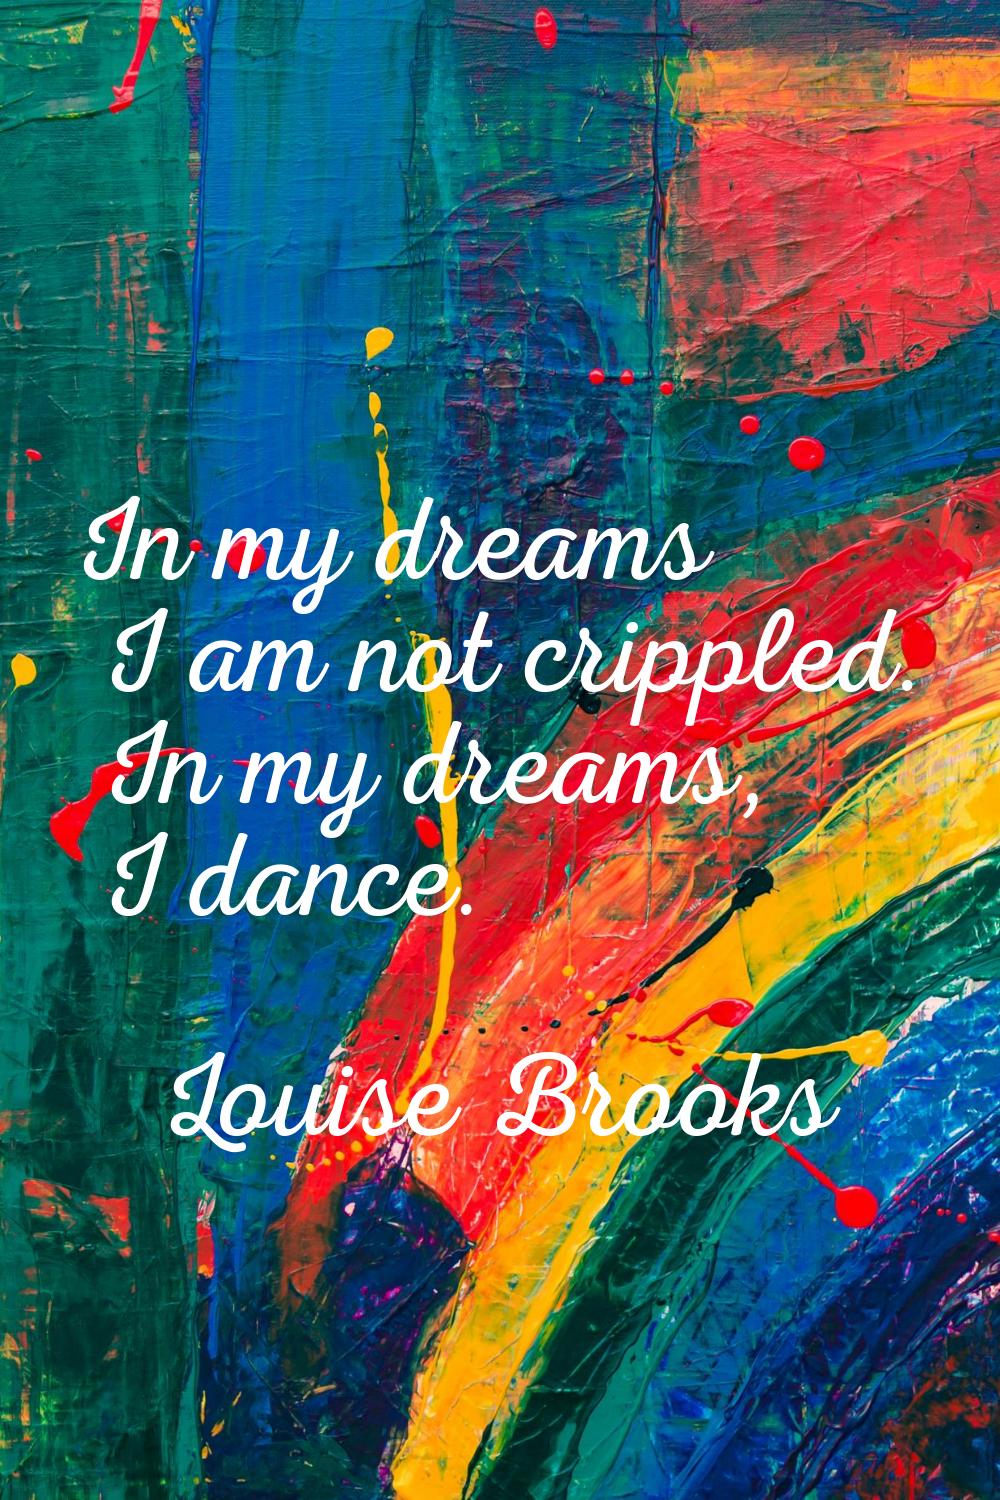 In my dreams I am not crippled. In my dreams, I dance.